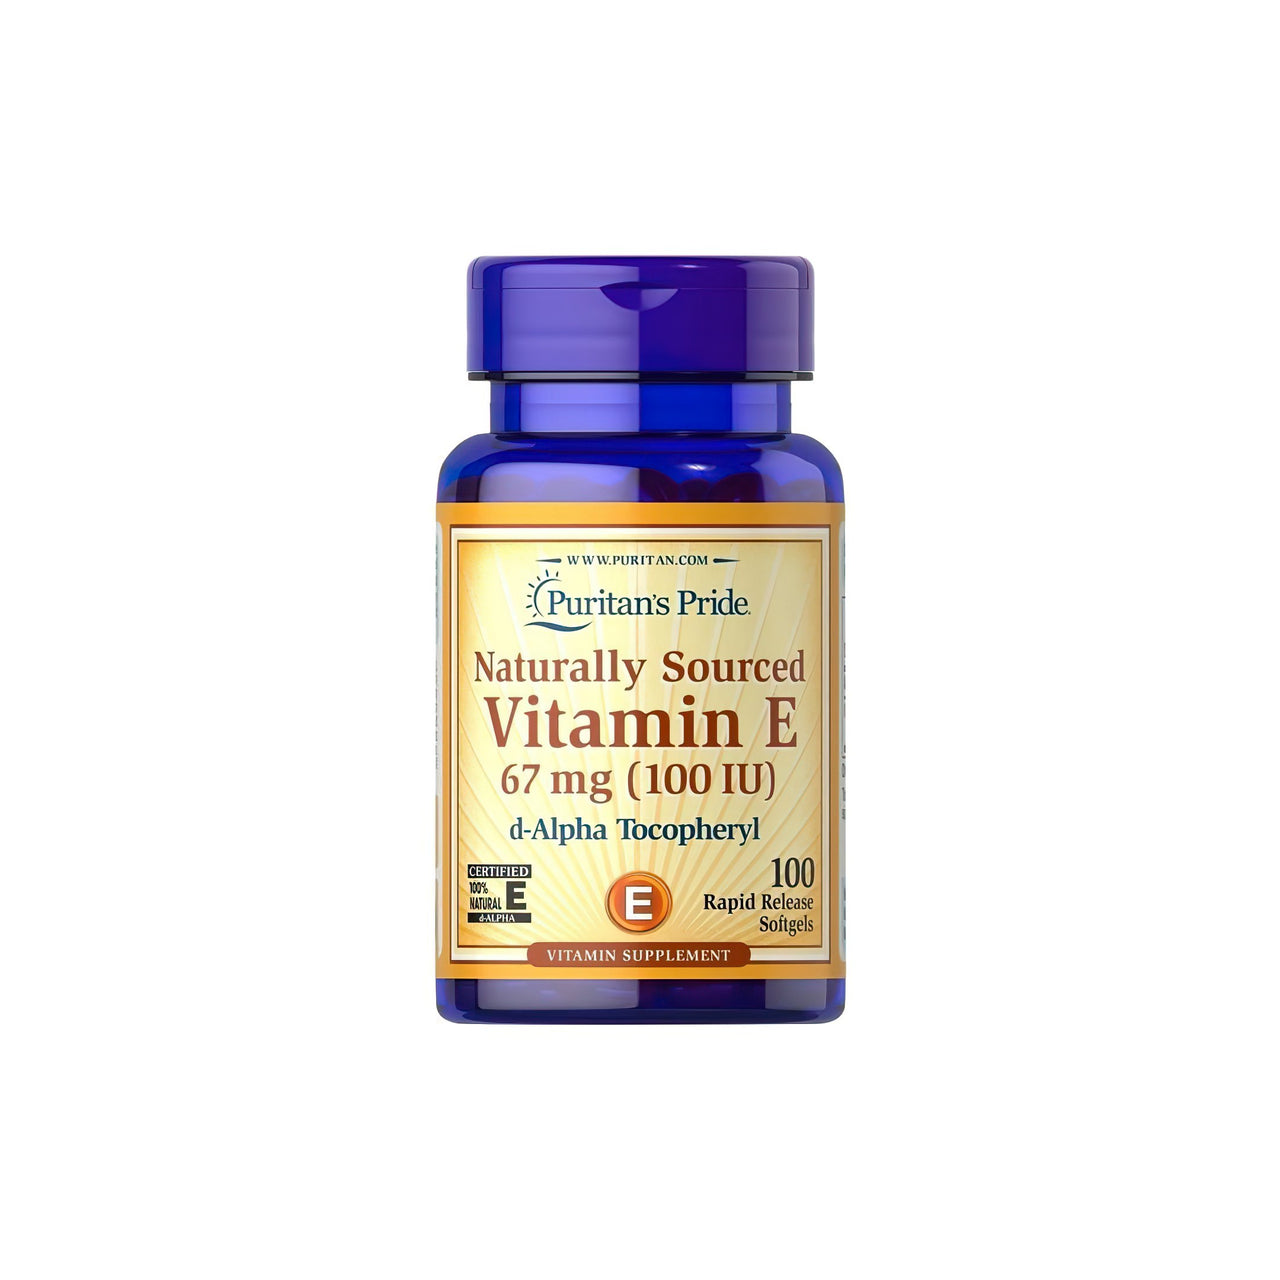 A bottle of Puritan's Pride Vitamin E 100 IU D-Alpha Tocopherol 100% Naturally 100 Rapid Release Softgels with a white background.